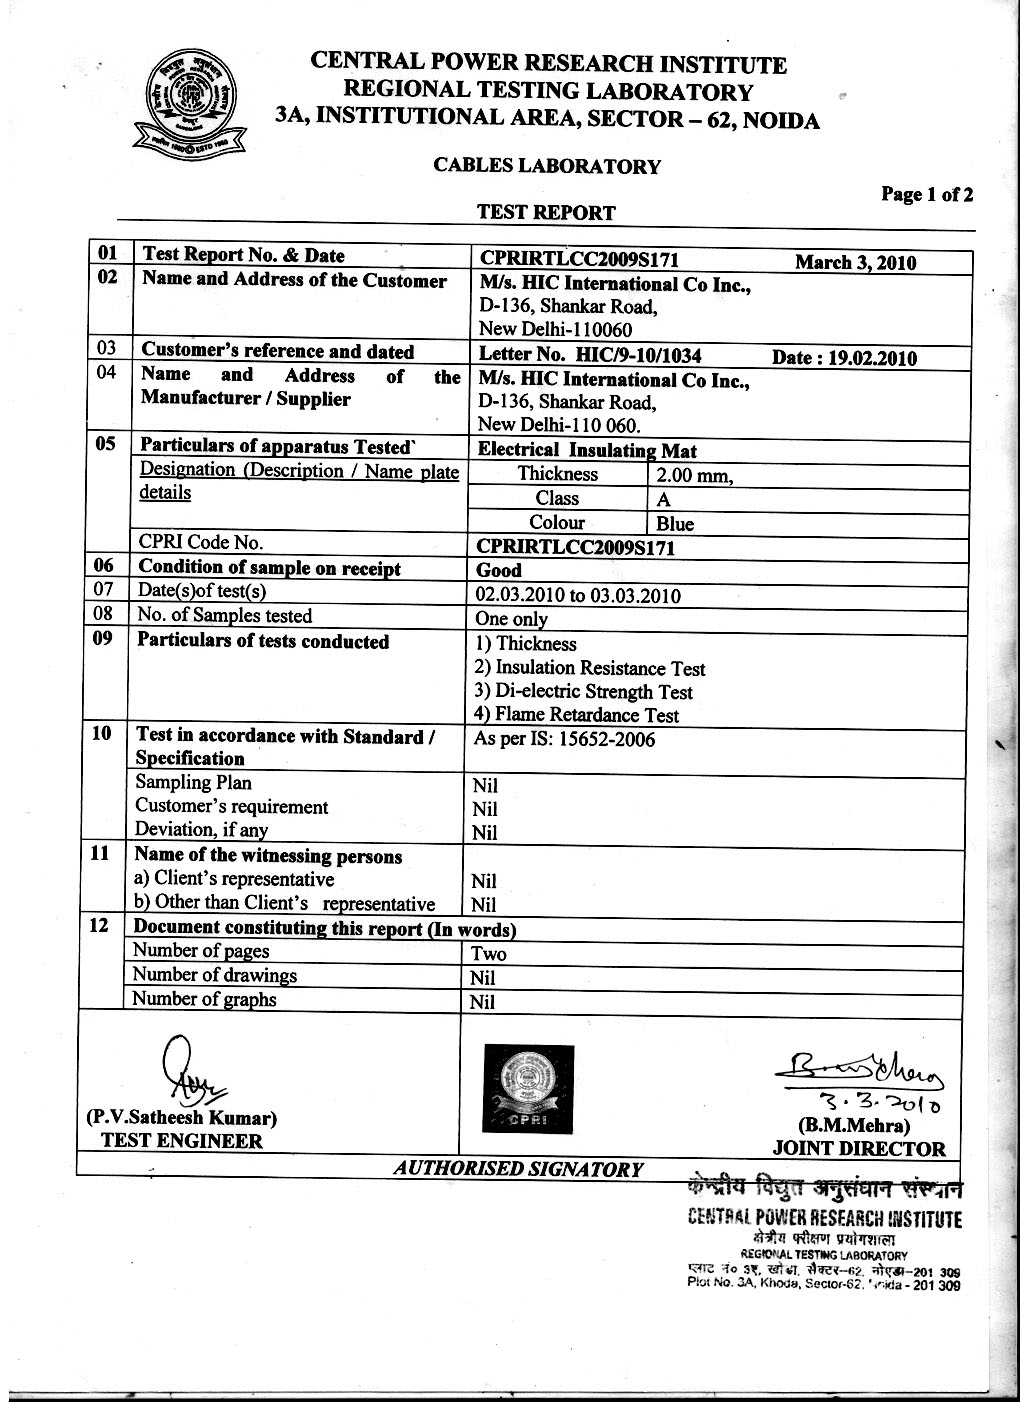 CPRI noida Test Report-HIC Electrical Insulation Mat- Pg 1 of 2